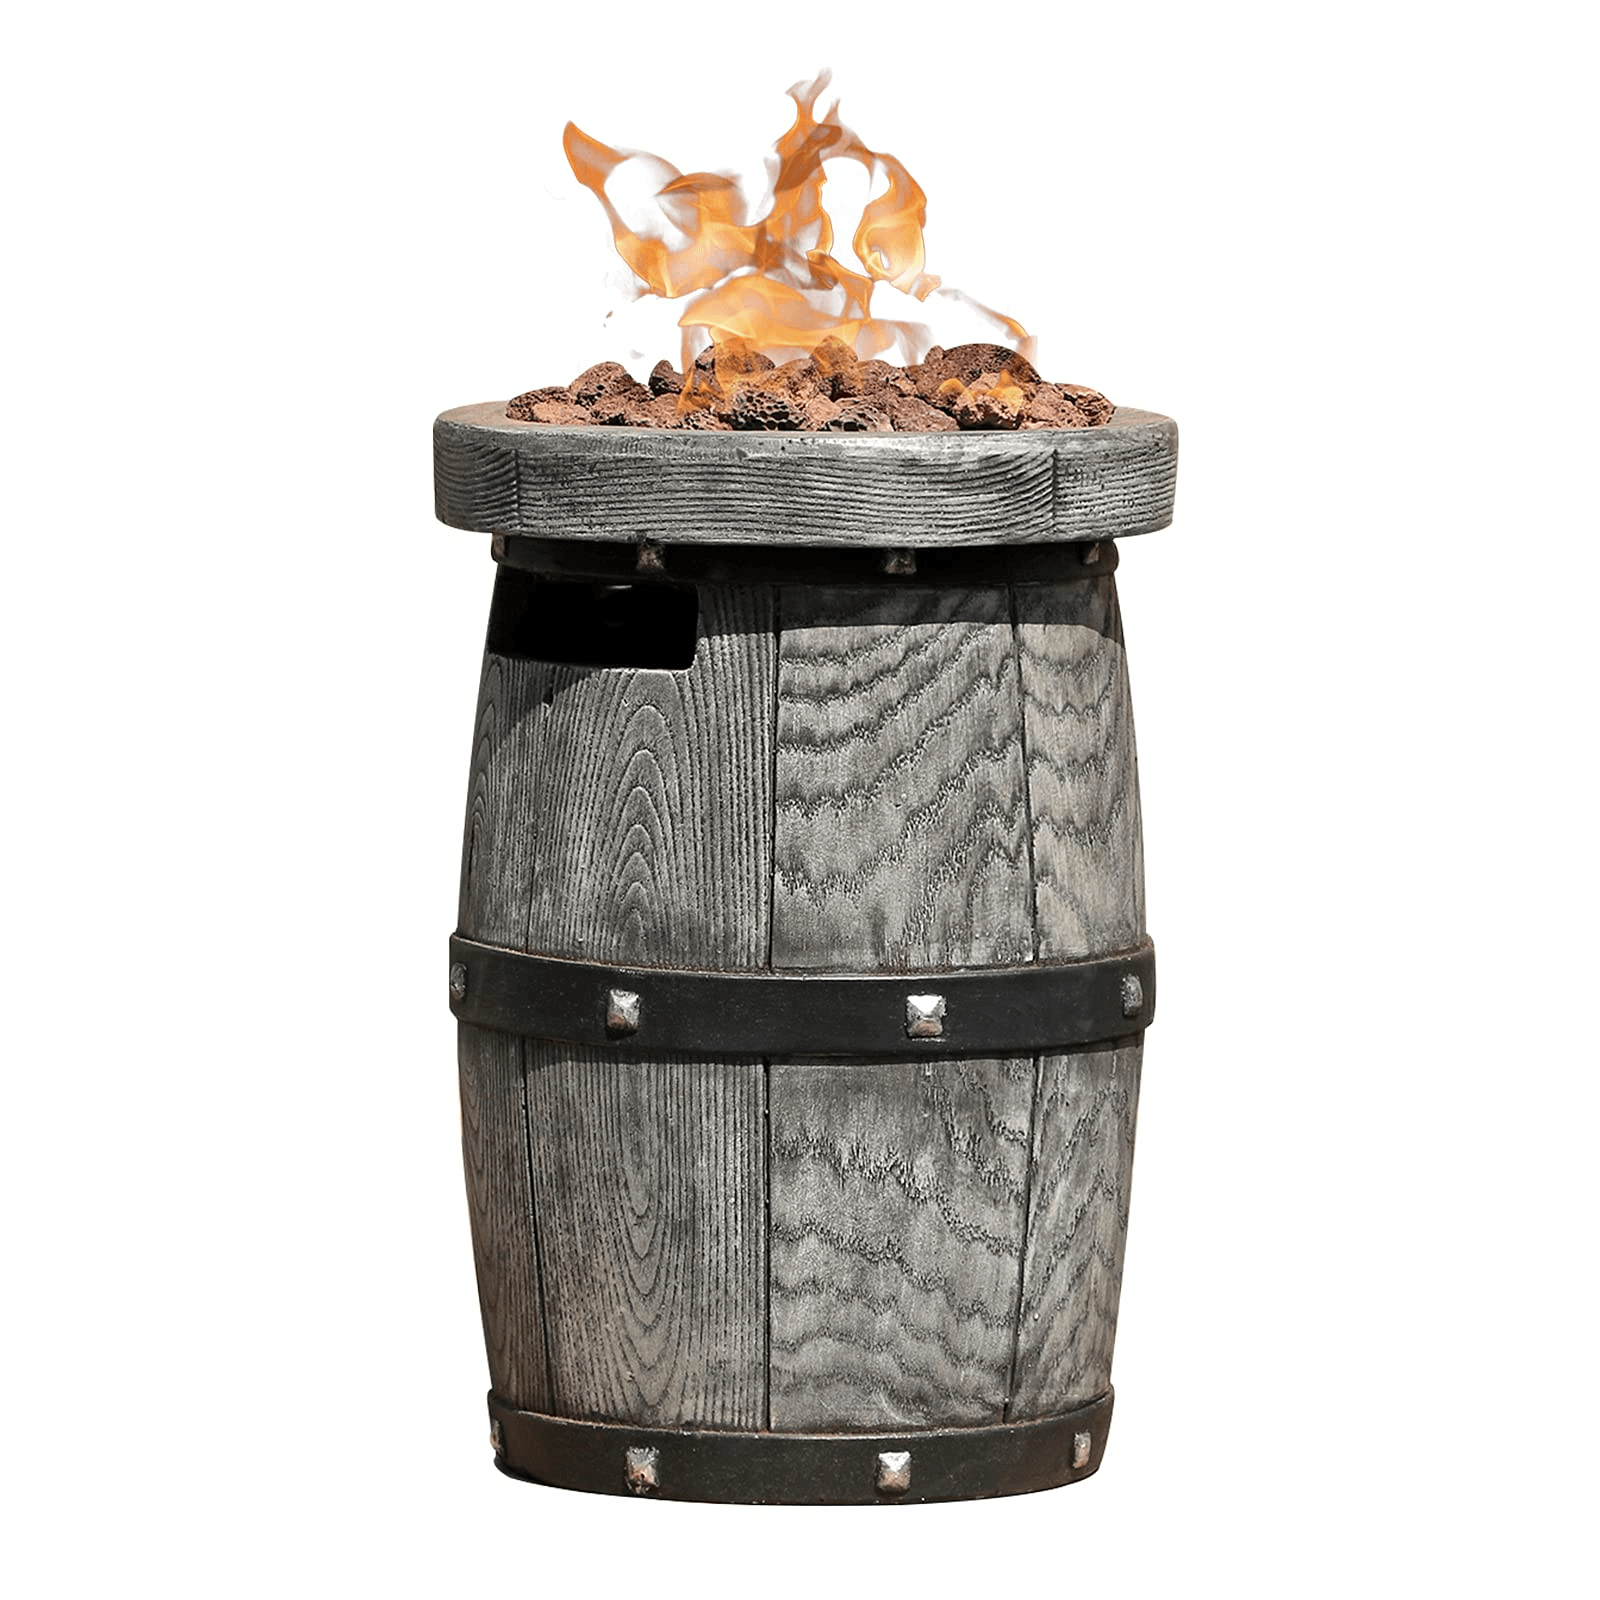 10-inch Outdoor Tabletop Propane Fire Pit Patio Barrel Fire Pit Table | Orange-Casual